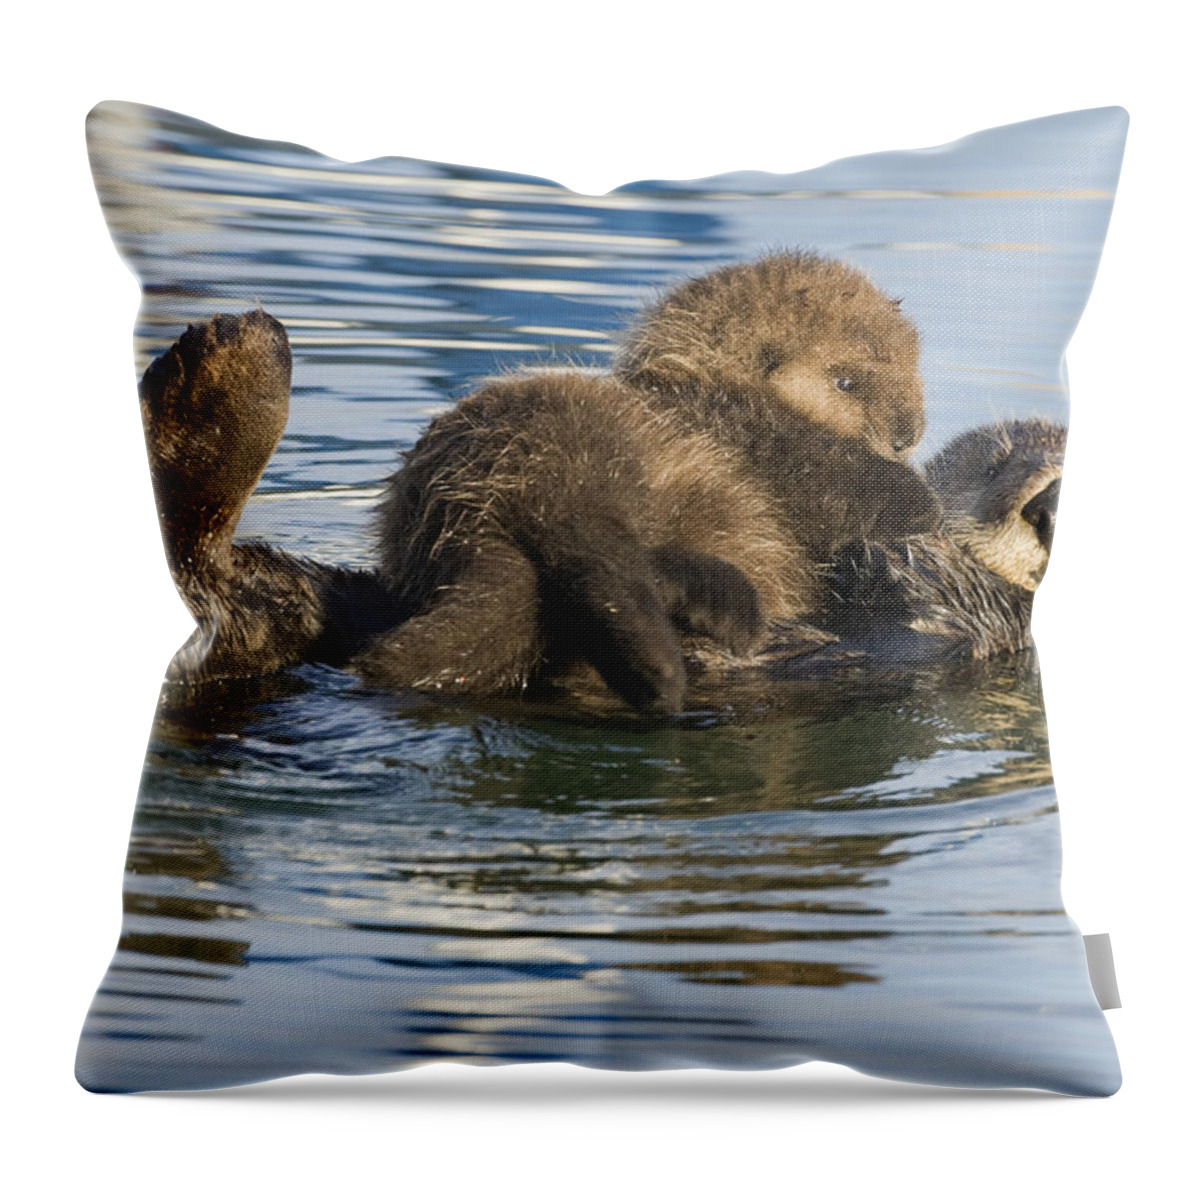 00429659 Throw Pillow featuring the photograph Sea Otter Mother And Pup Elkhorn Slough by Sebastian Kennerknecht